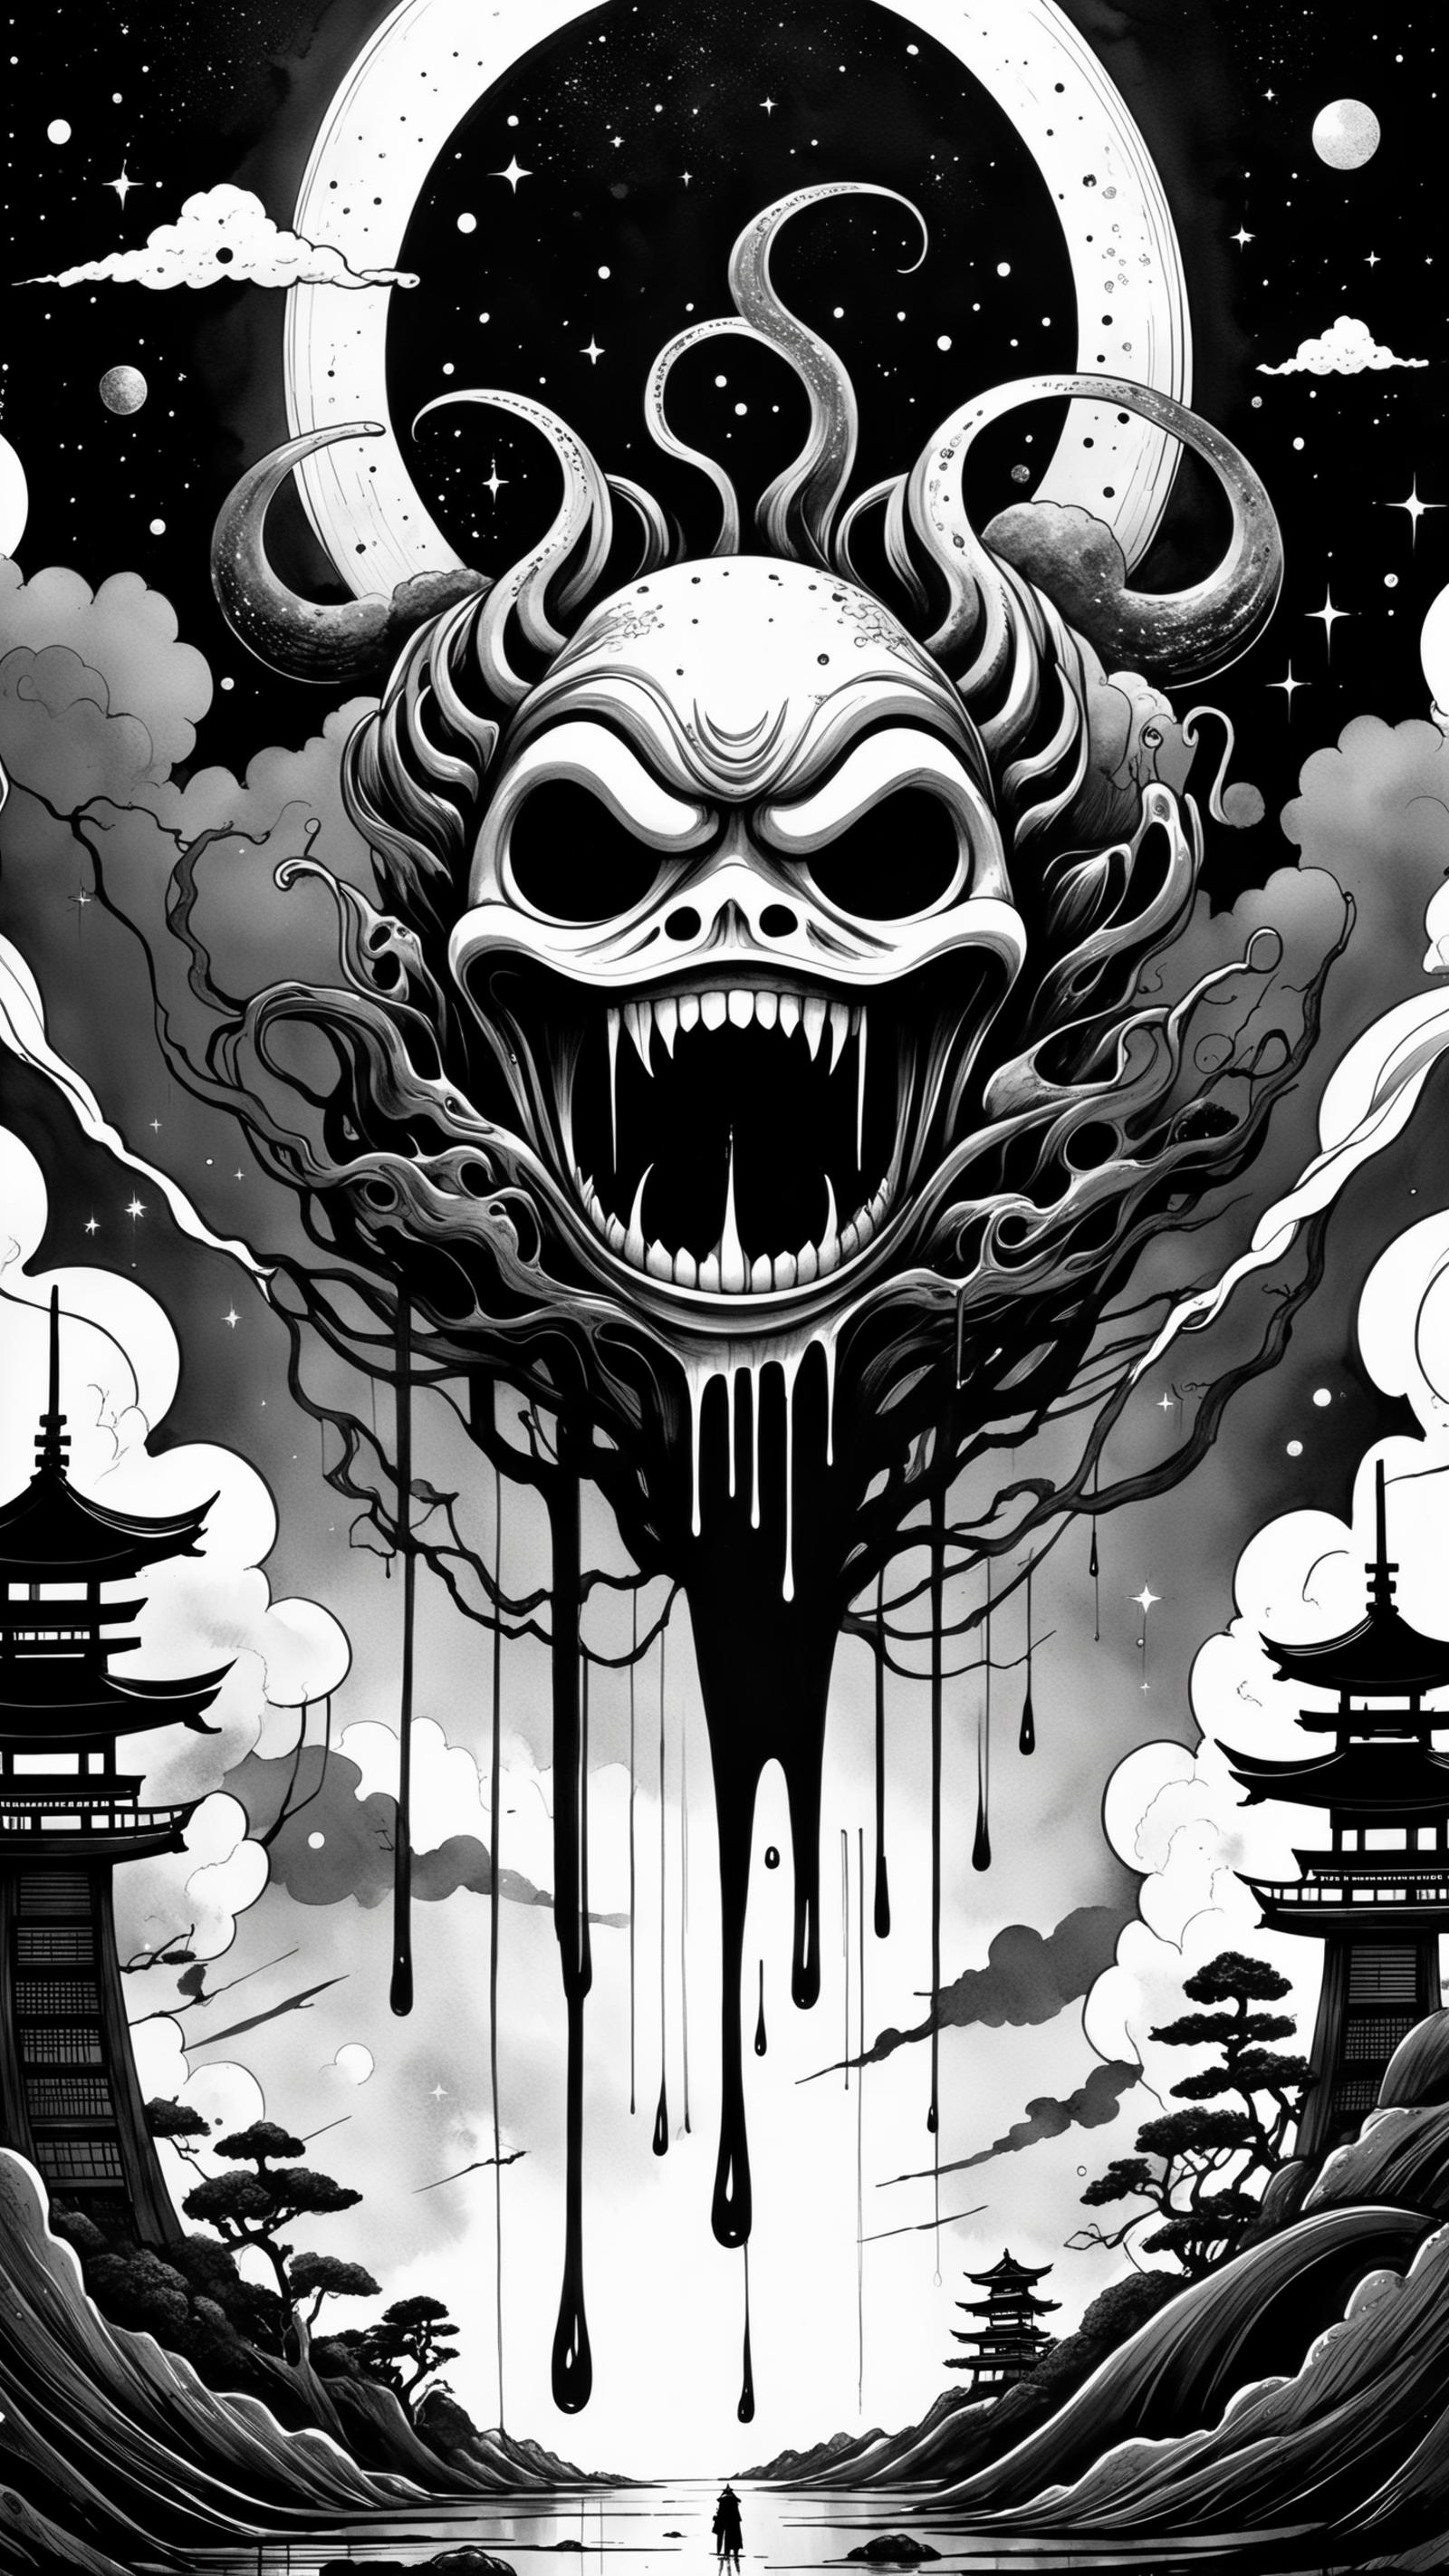 A drawing of a demonic screaming face with dripping black goo, surrounded by clouds and buildings.